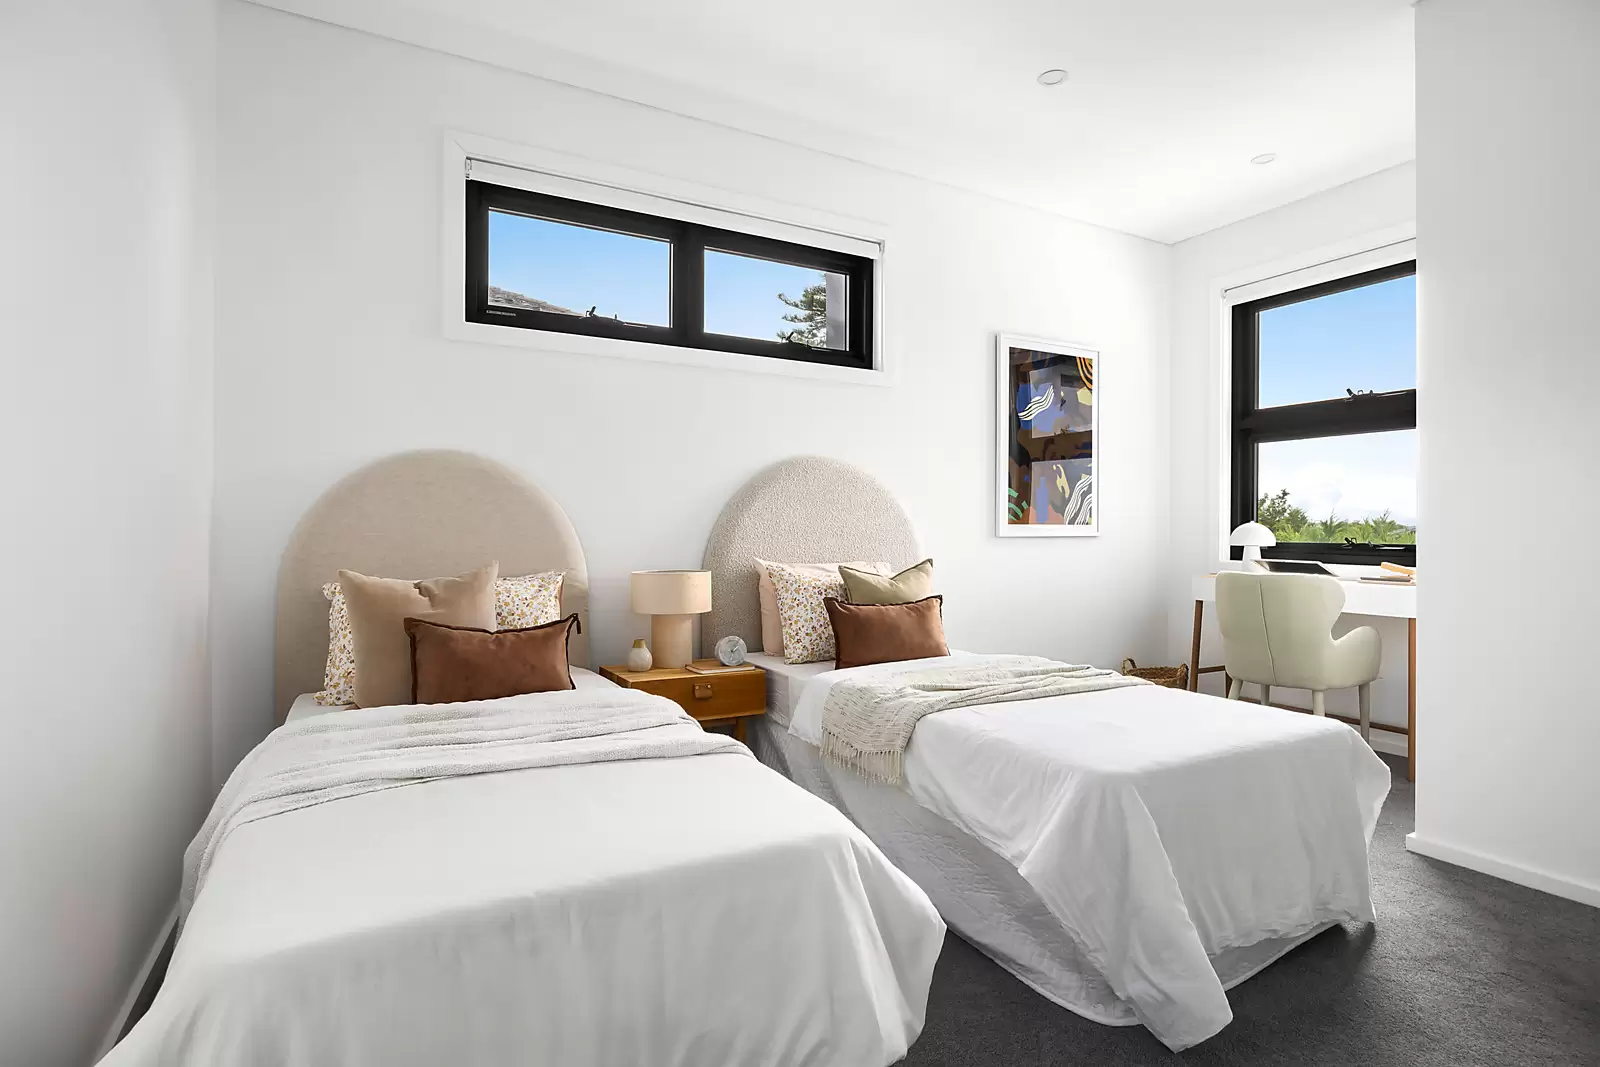 Photo #14: 40a Creer Street, Randwick - Sold by Sydney Sotheby's International Realty